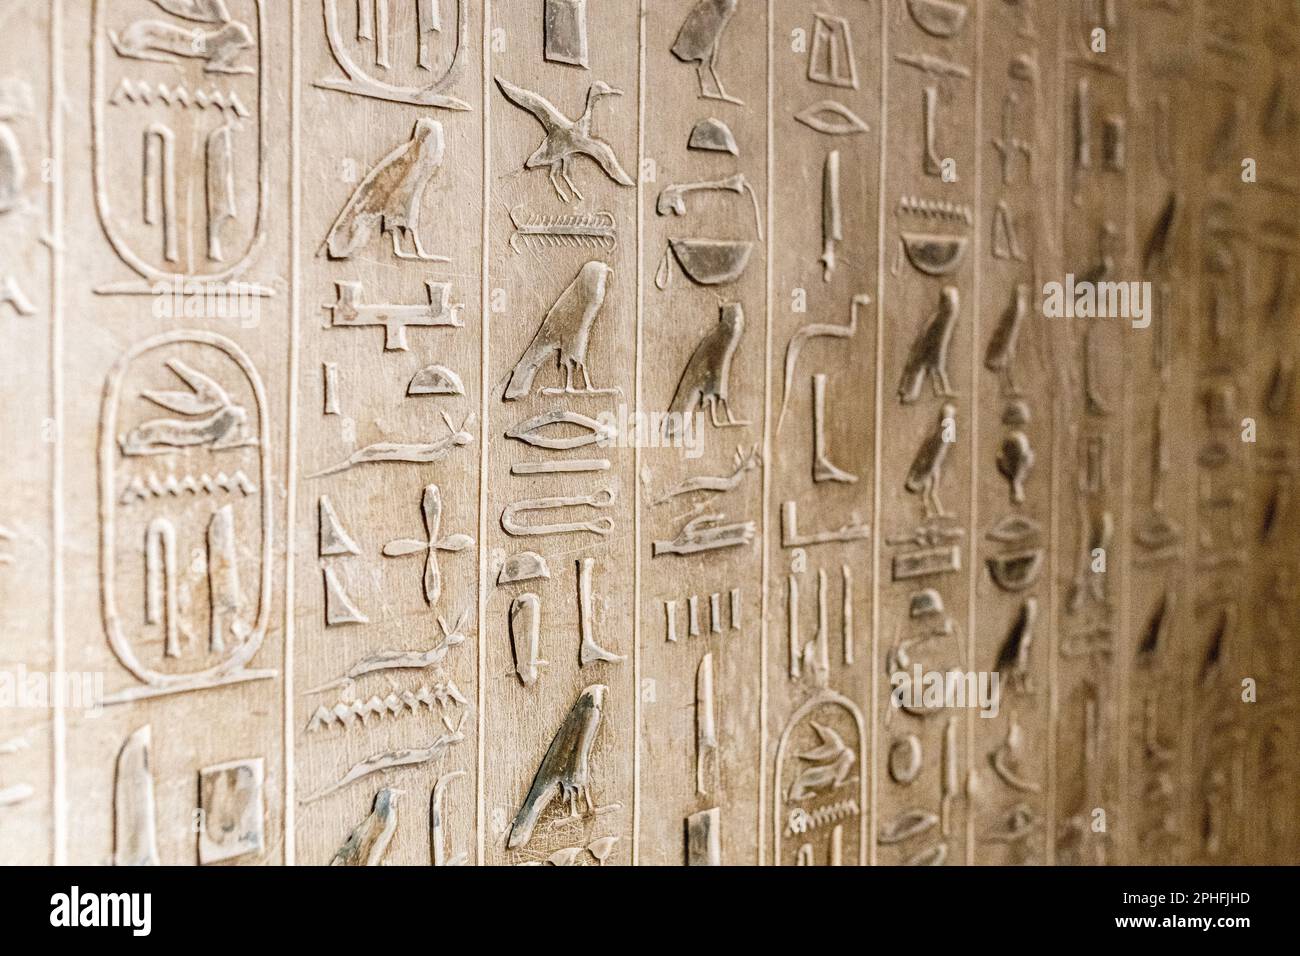 Authentic hieroglyphic inscriptions inside an underground burial chamber in the Pyramid of Unas at the Saqqara Necropolis in Giza, Egypt Stock Photo